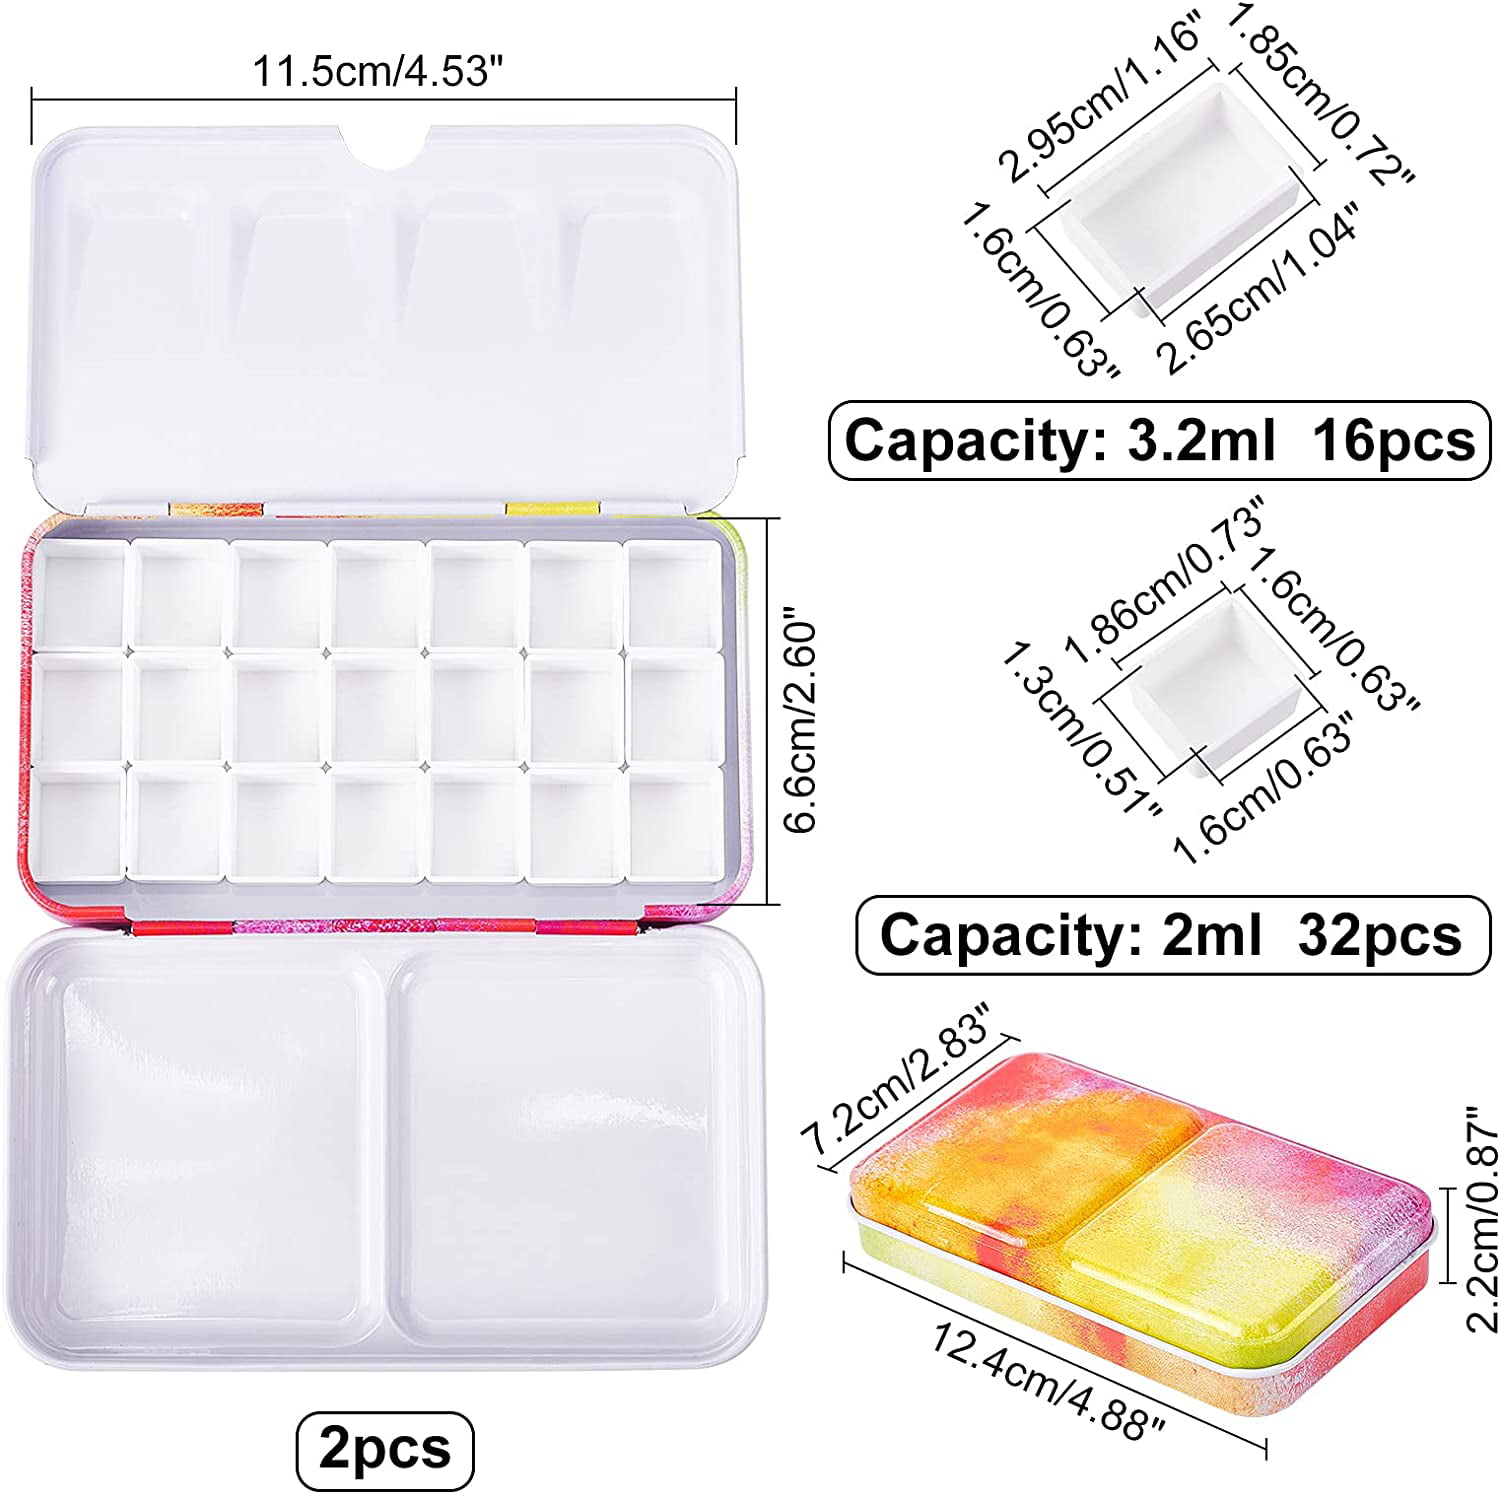 Model T02 FCLUB Small Watercolor Tray Palette with 12Pcs Half Pans